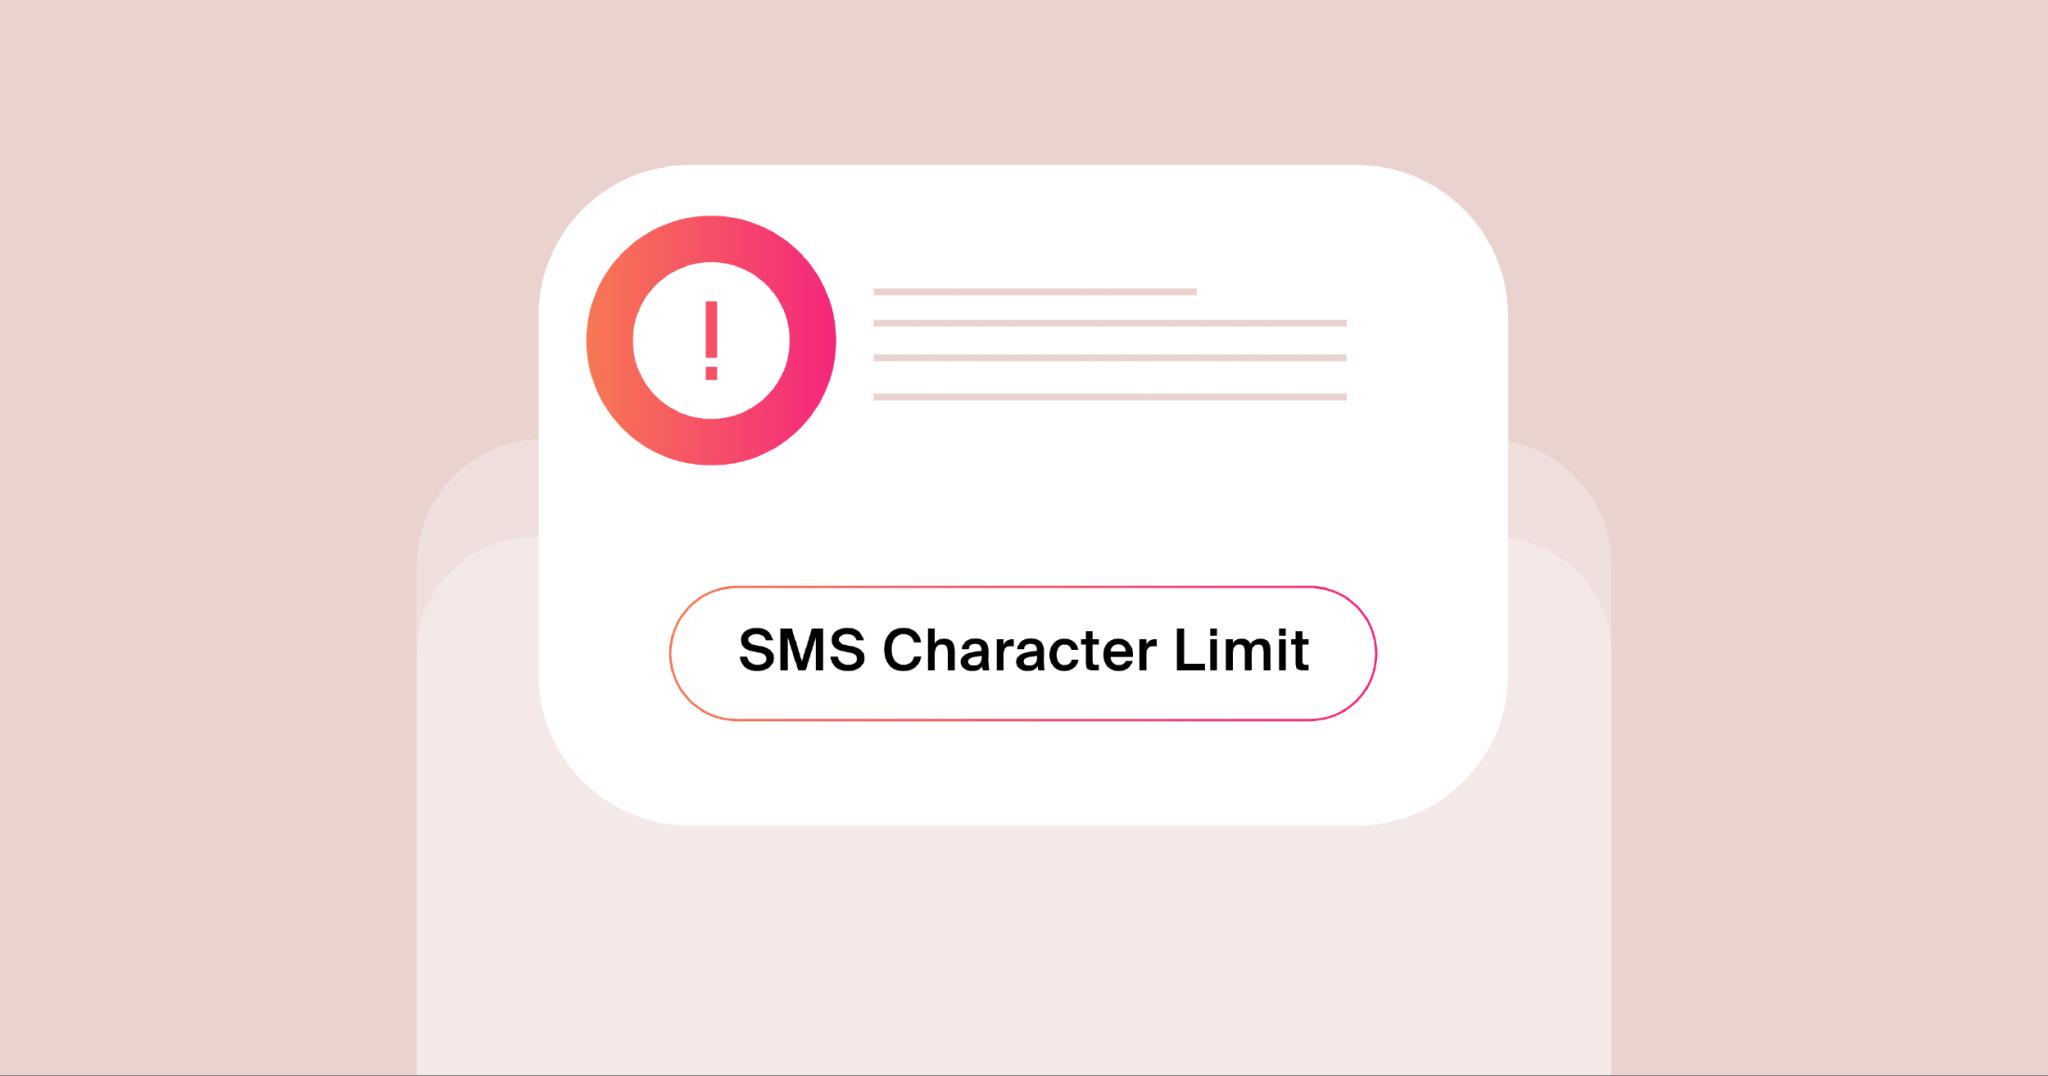 SMS Character Limit